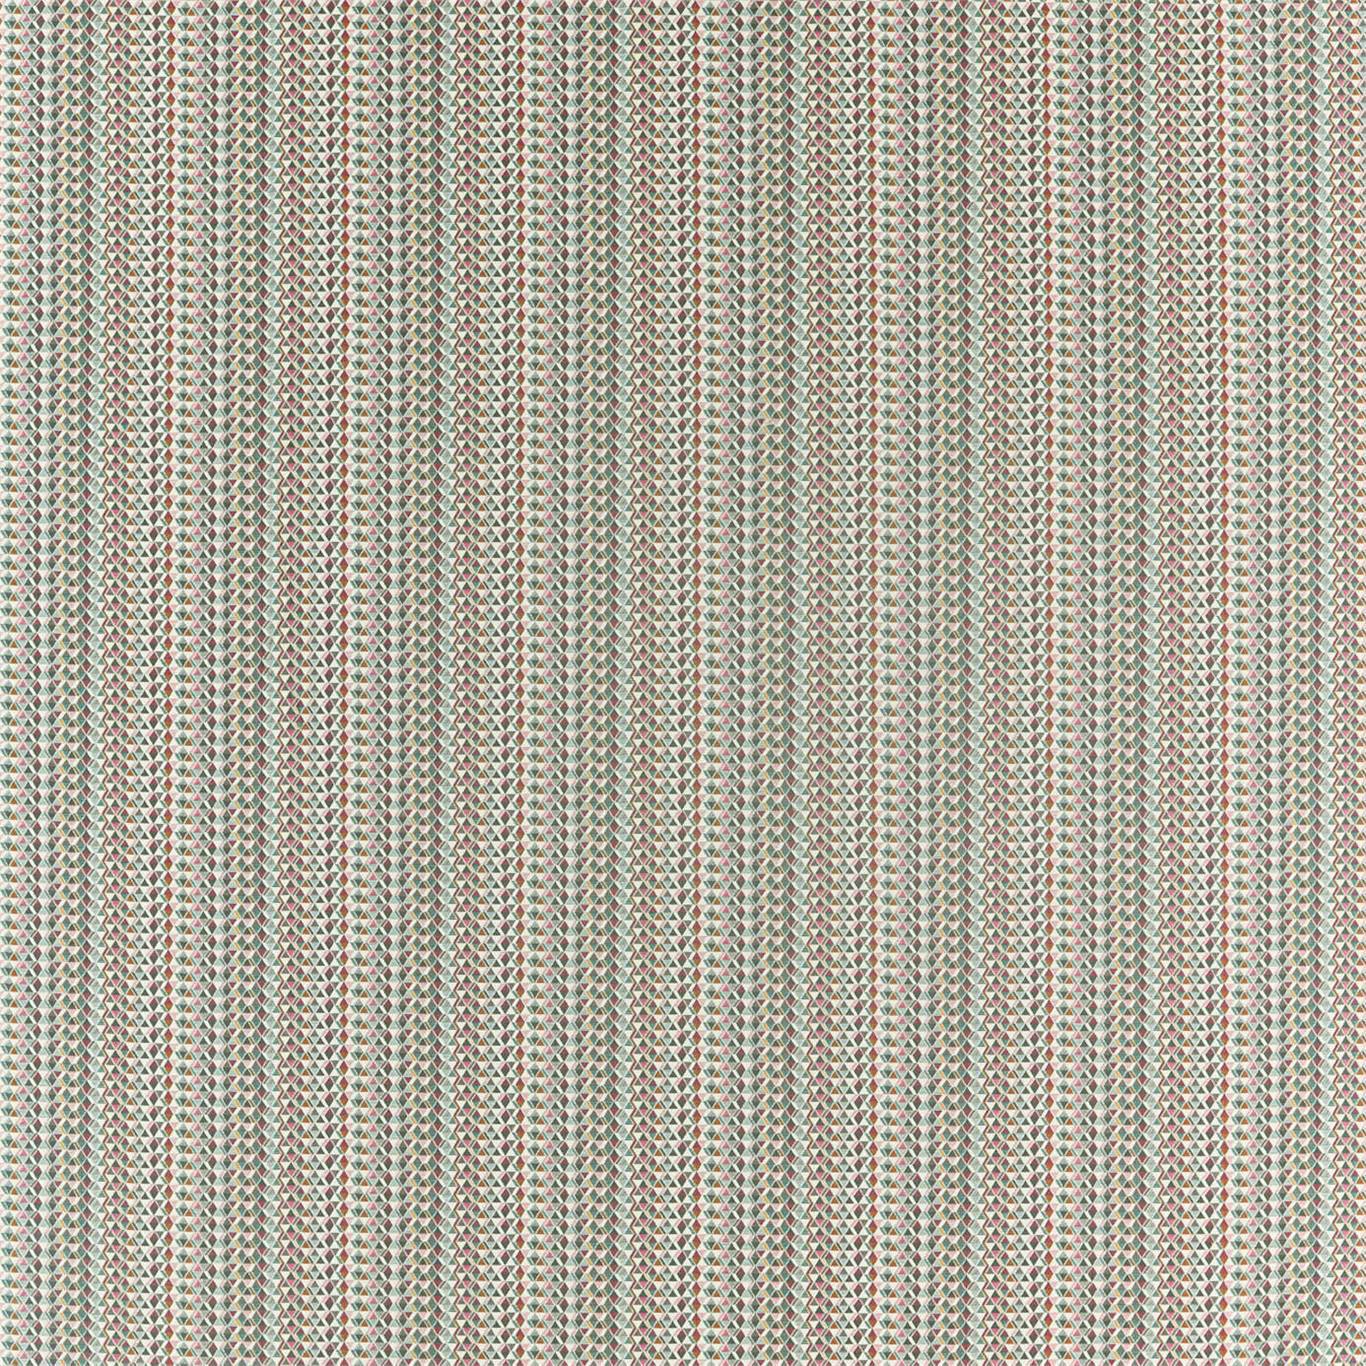 Concentric Fabric by Scion - NZAC132921 - Wildflower